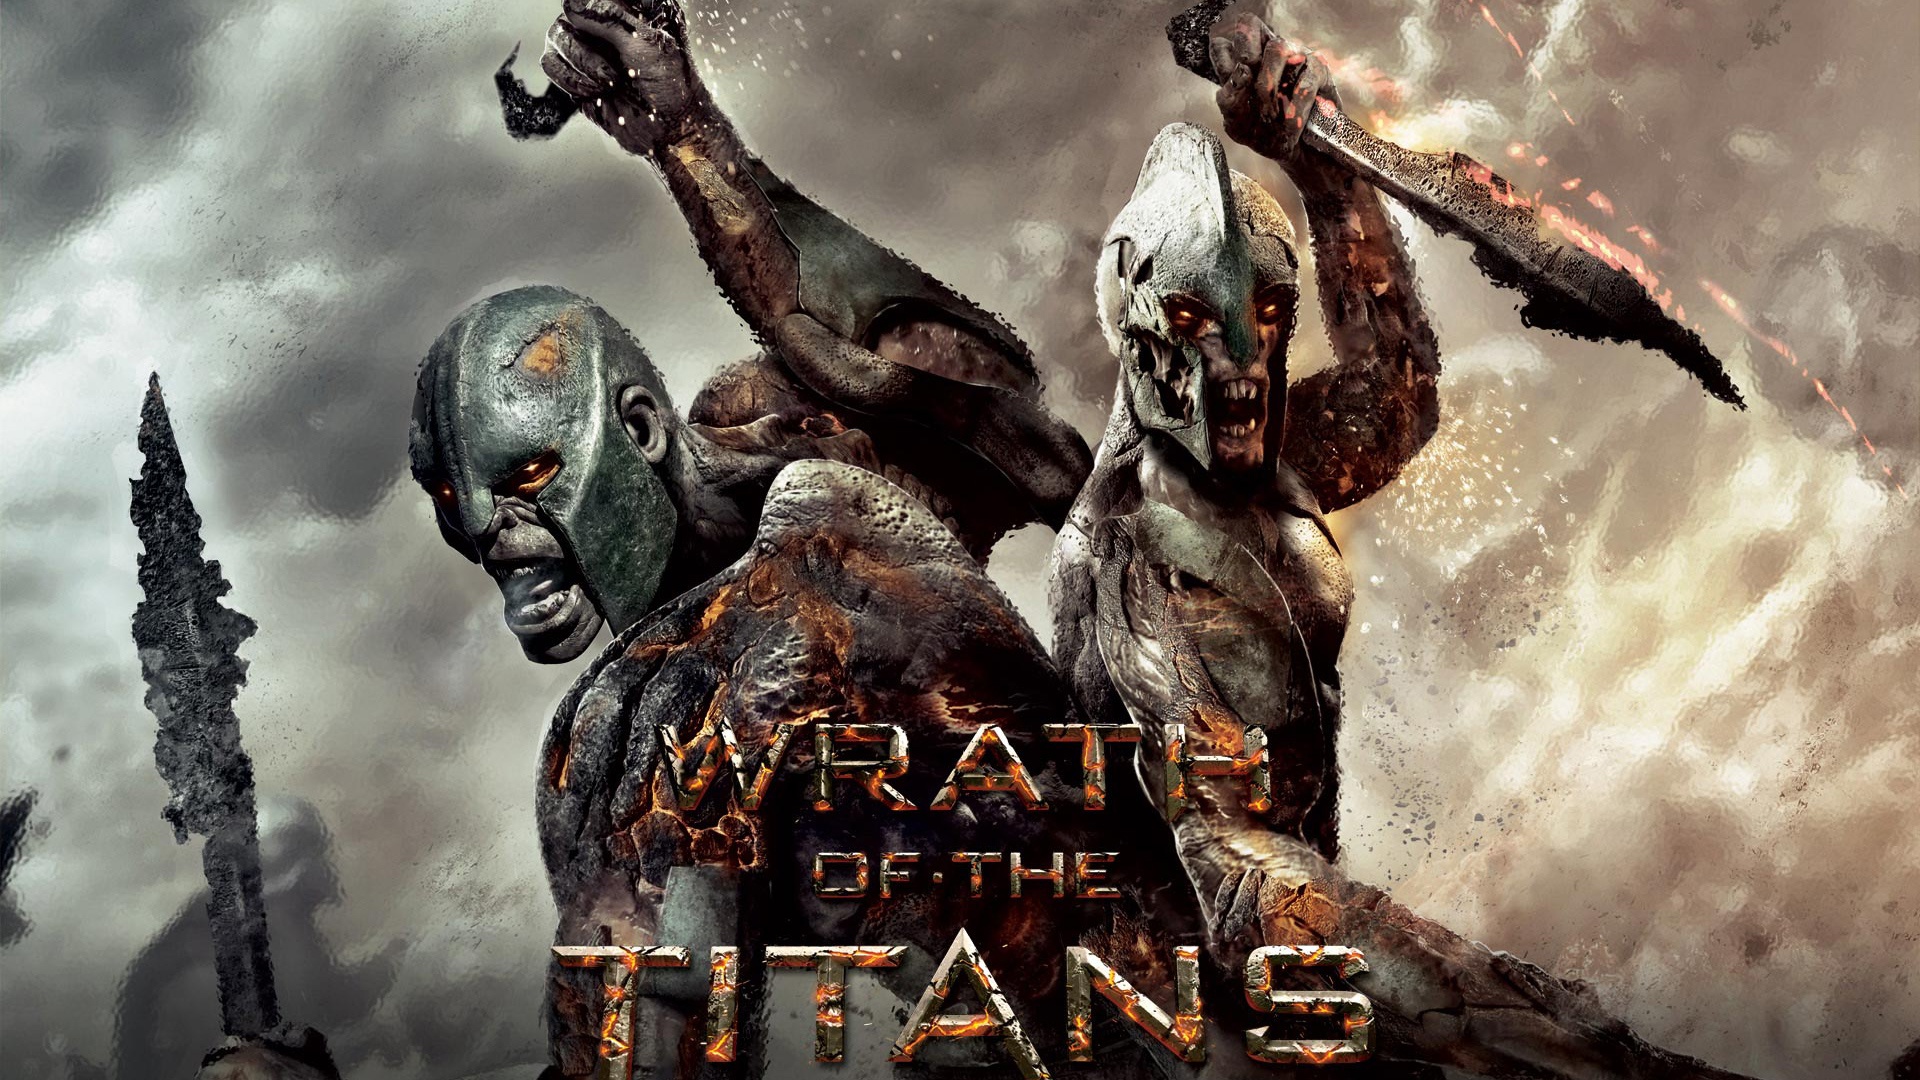 Wrath of the Titans Movie Wallpapers HD 1080p HD Desktop Wallpapers